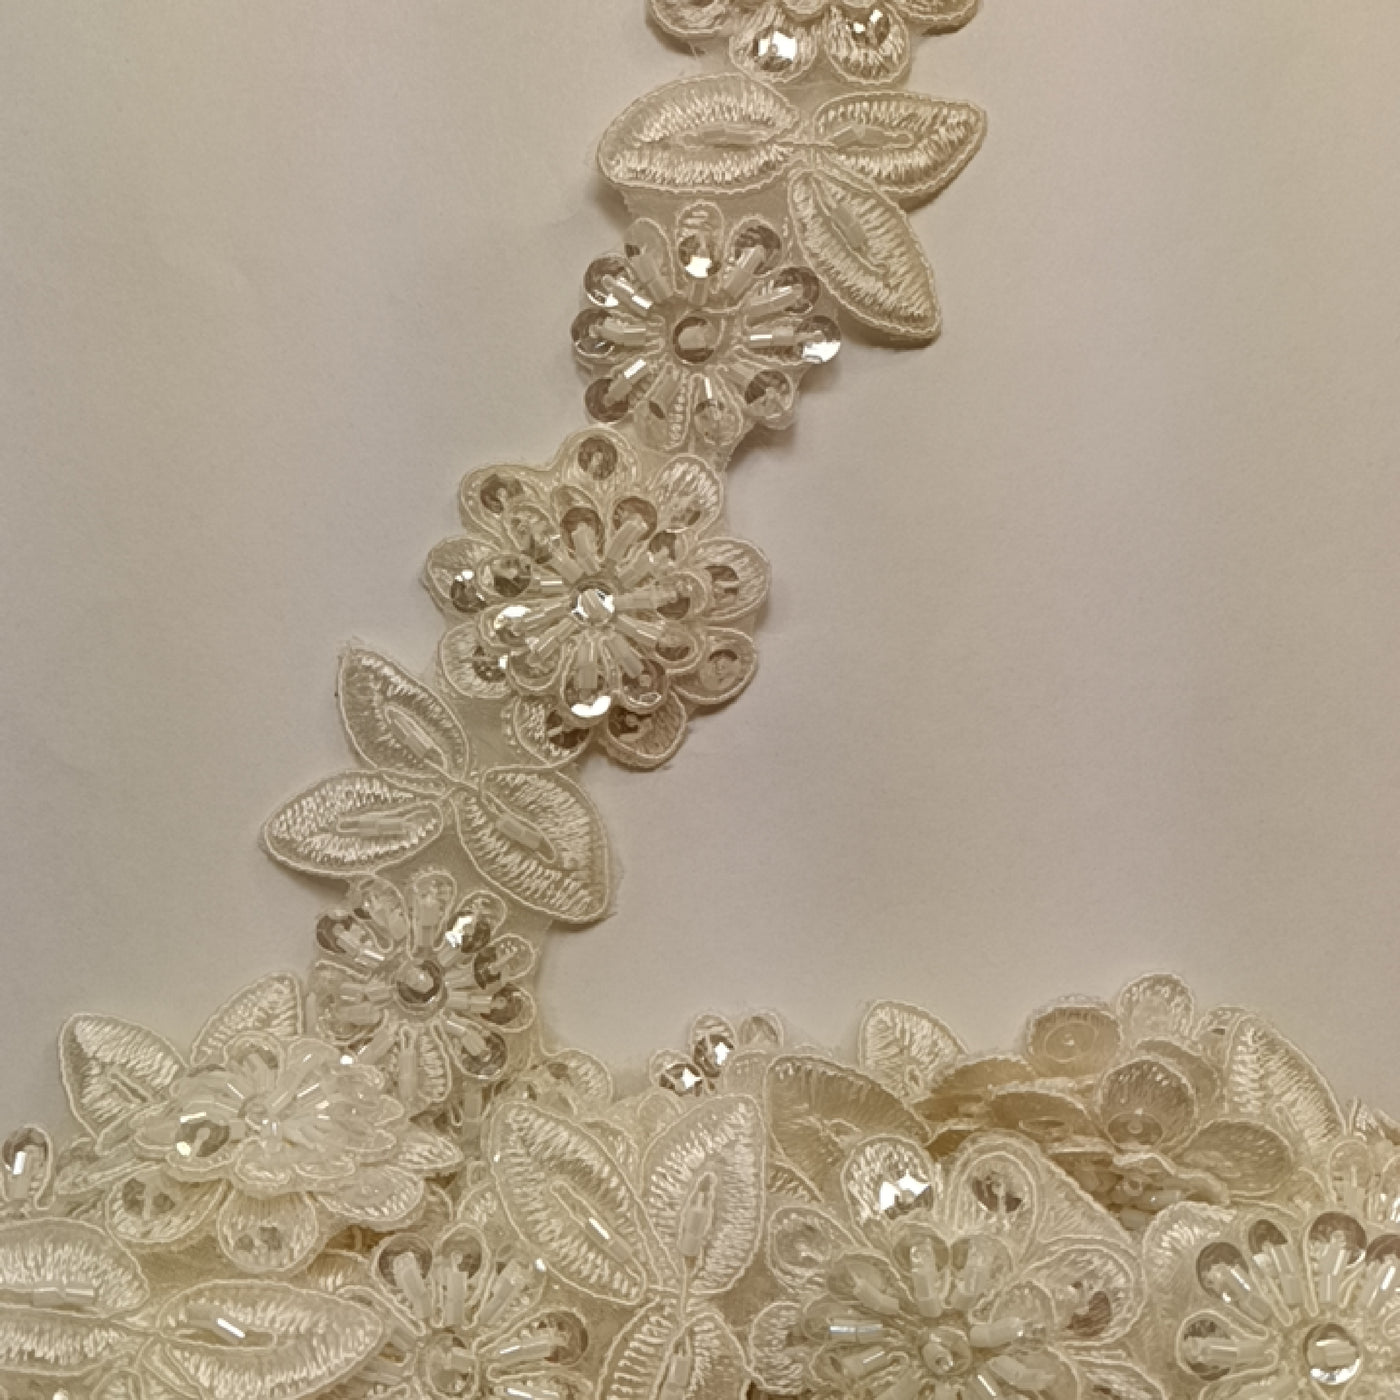 3D Floral Corded, Beaded & Embroidered Ivory Trimming. Lace Usa